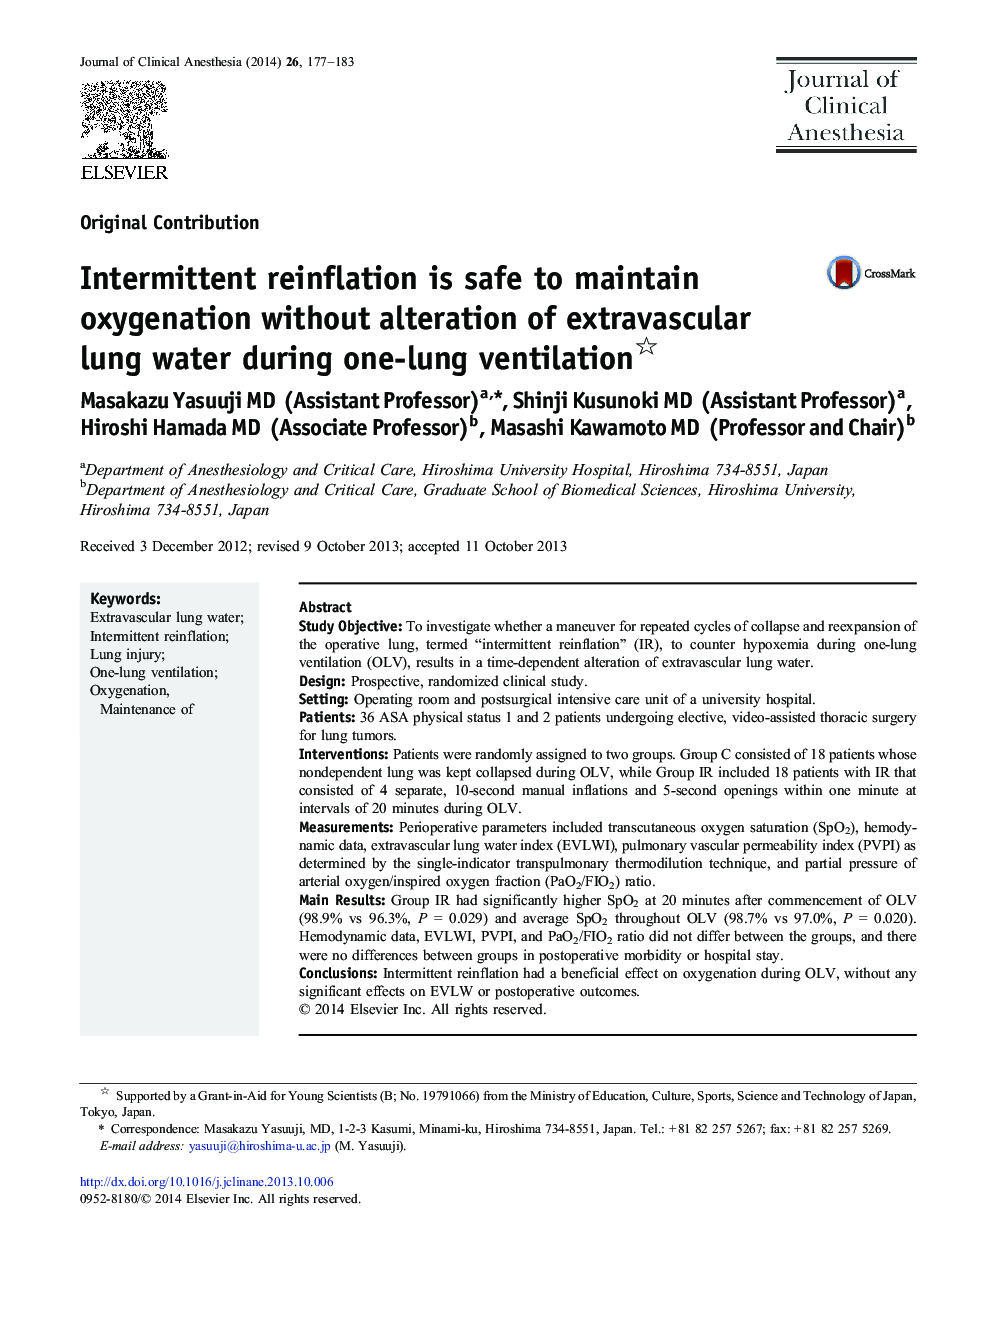 Intermittent reinflation is safe to maintain oxygenation without alteration of extravascular lung water during one-lung ventilation 